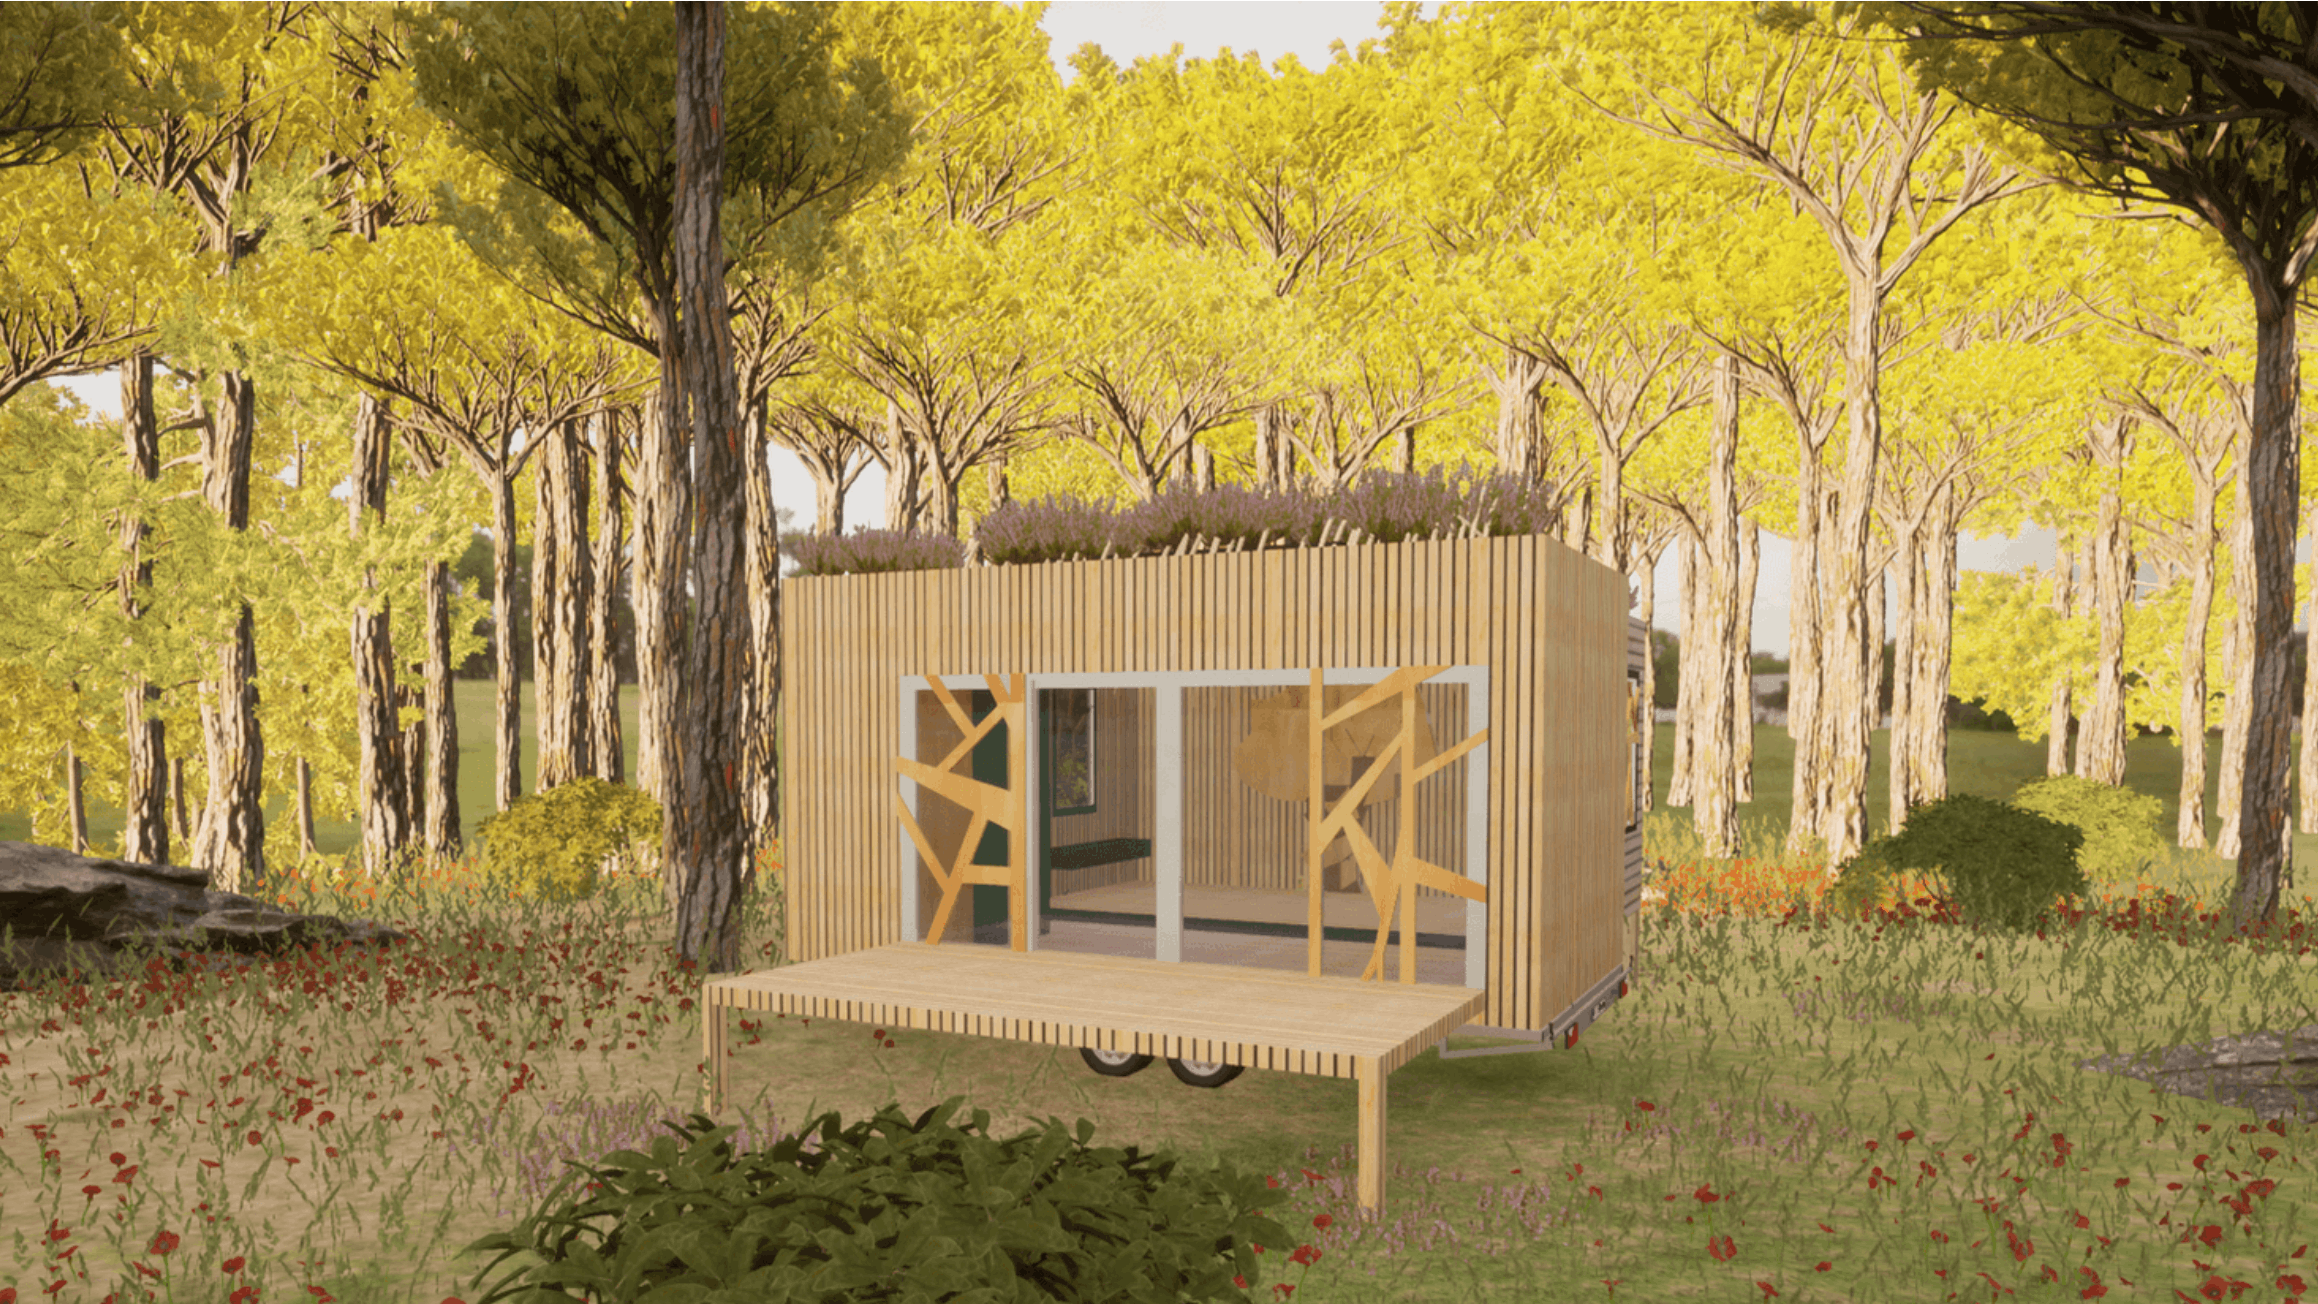 COMMENT FINANCER MA TINY HOUSE ?